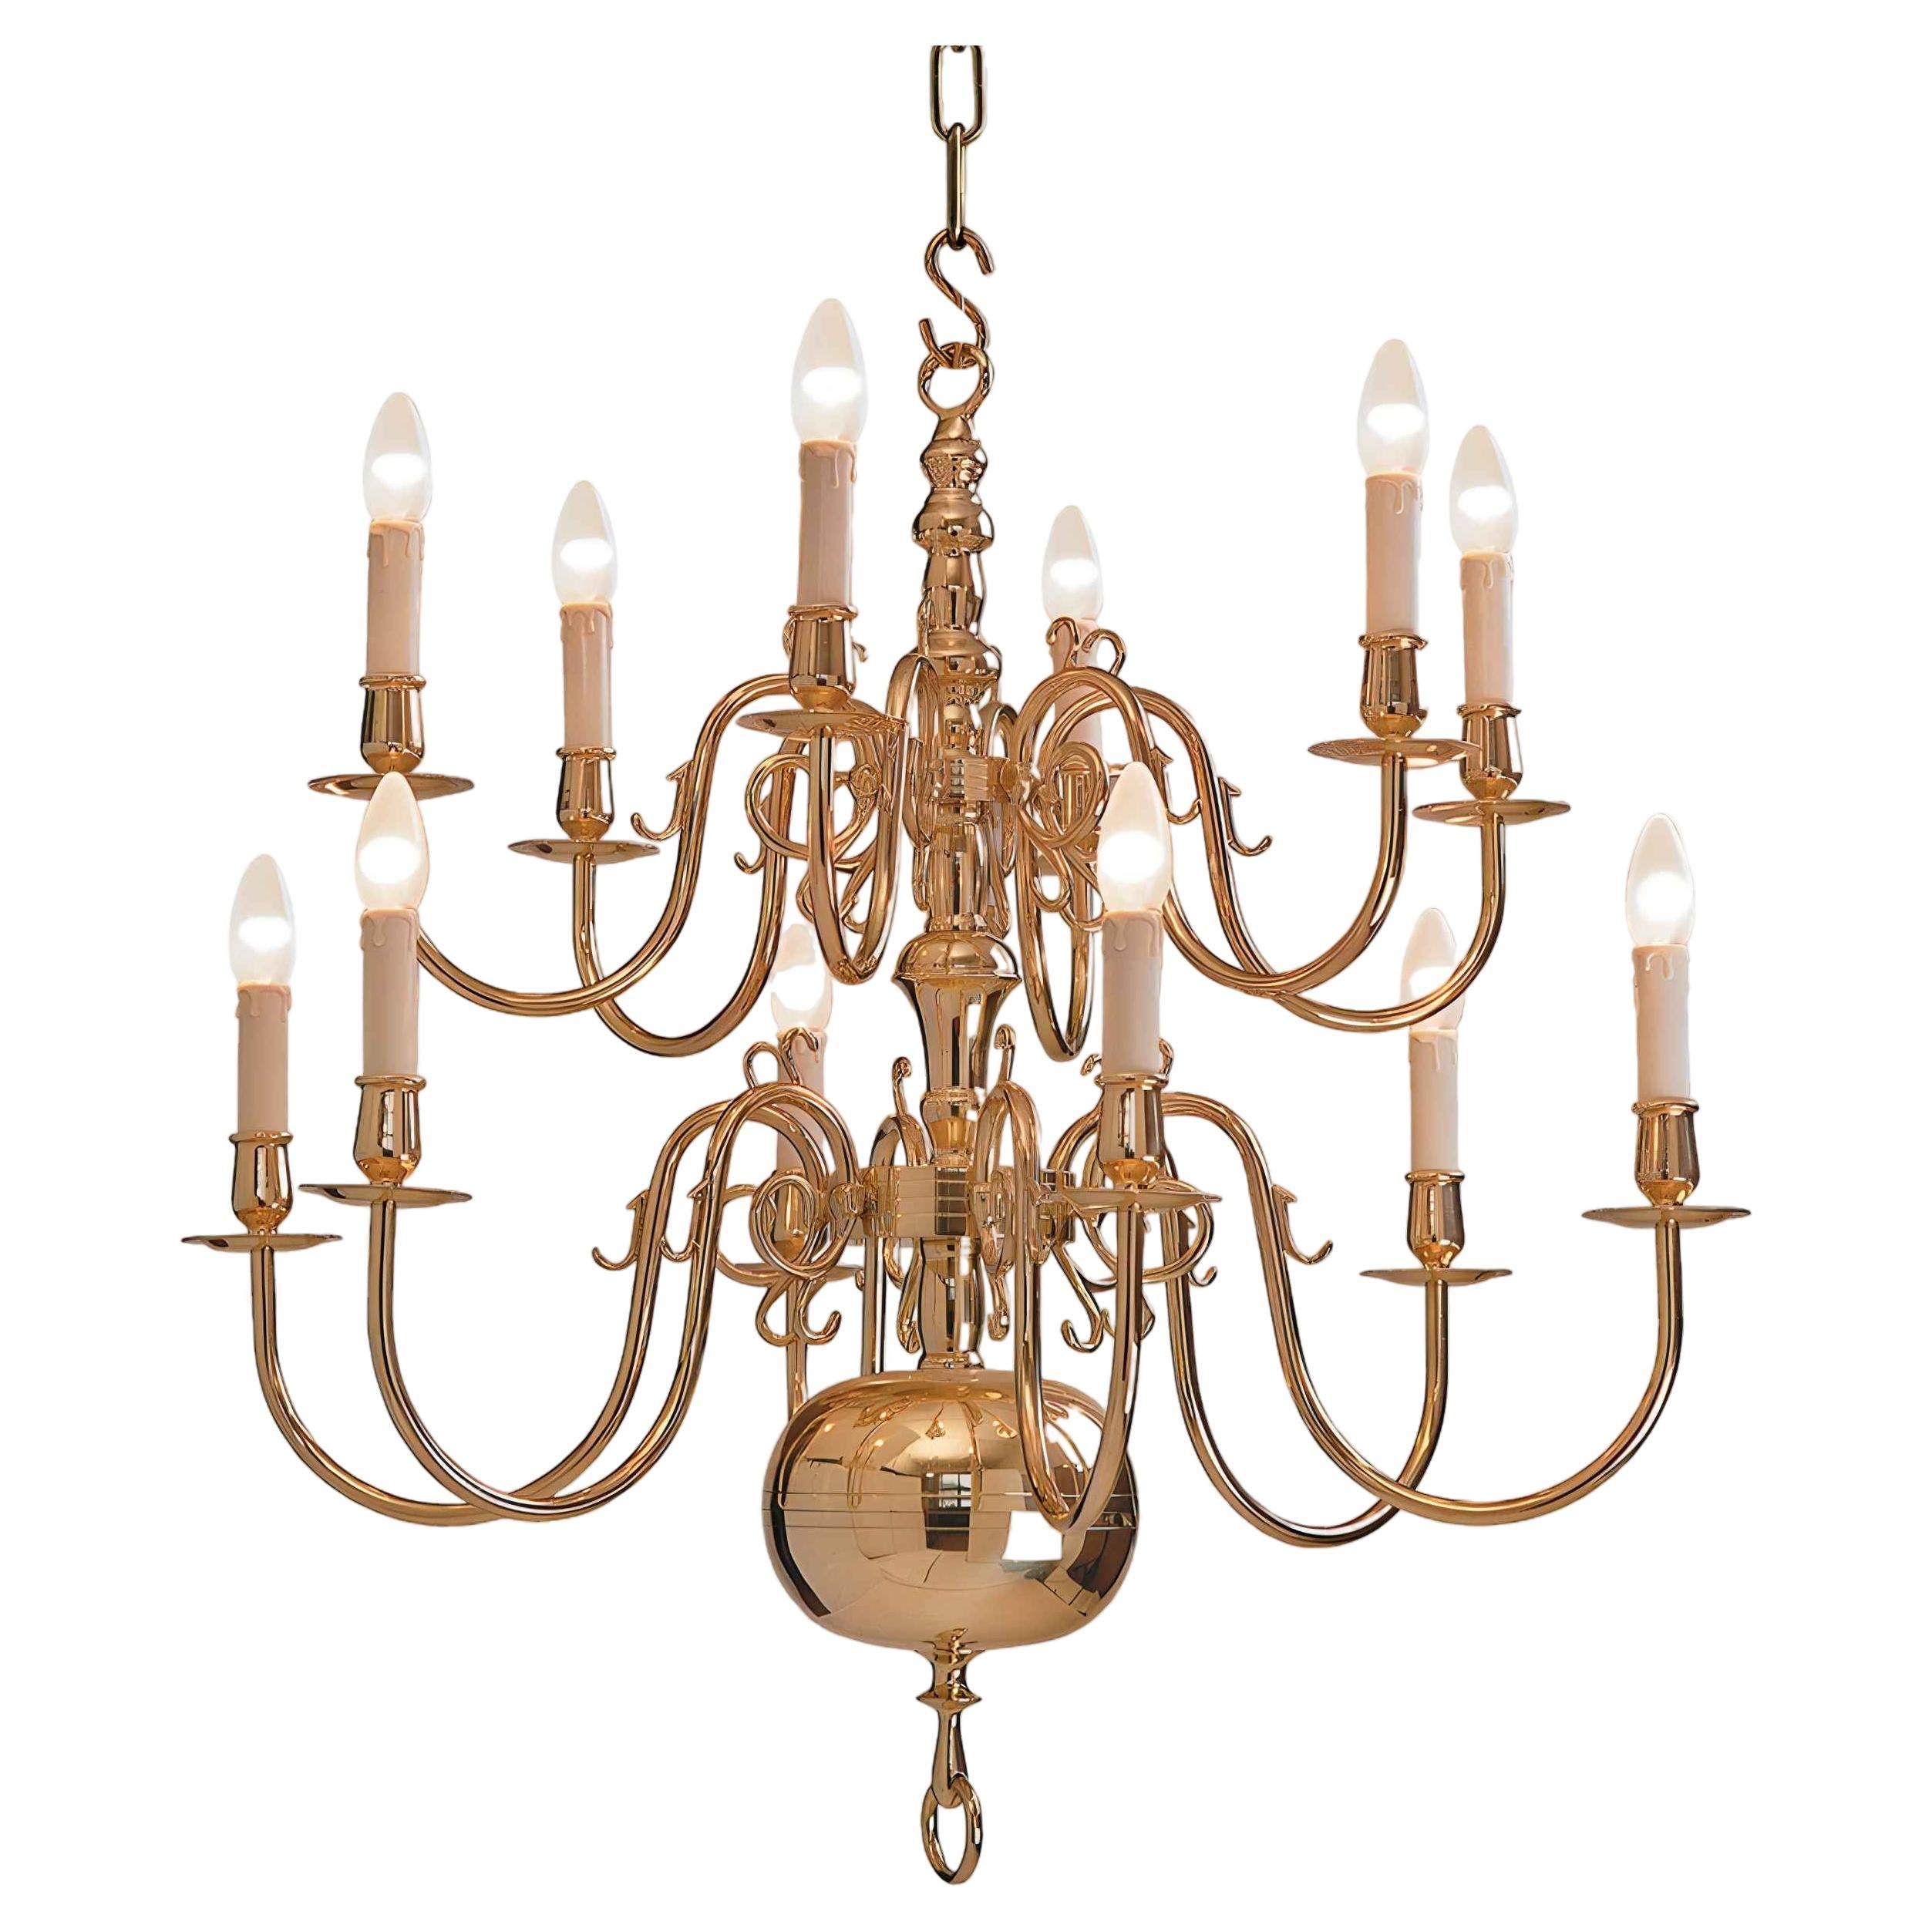 2 Tier 19th Century Electric Model Dutch Brass Chandelier with 12 Lights H80xW82 For Sale